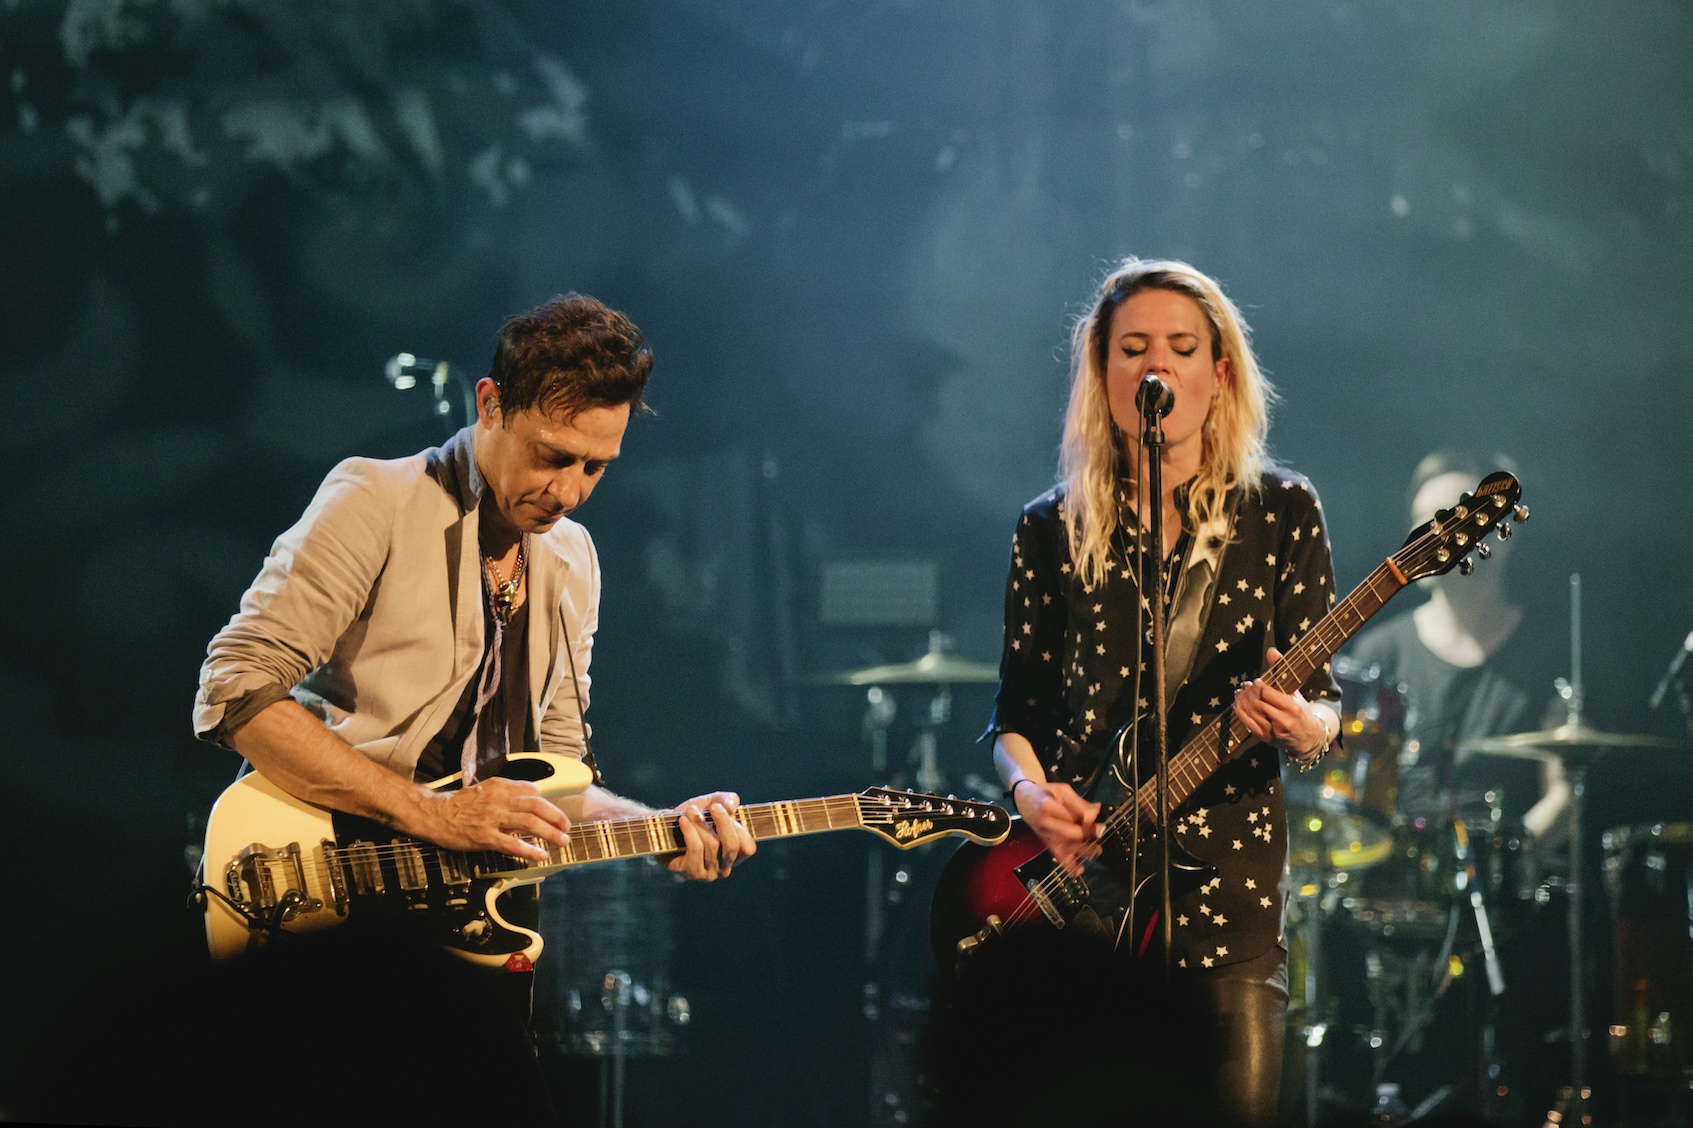 The Kills at Fox Theater 9/2/16. Photo by Michelle Shiers (@MichelleShiers) for www.BlurredCulture.com.